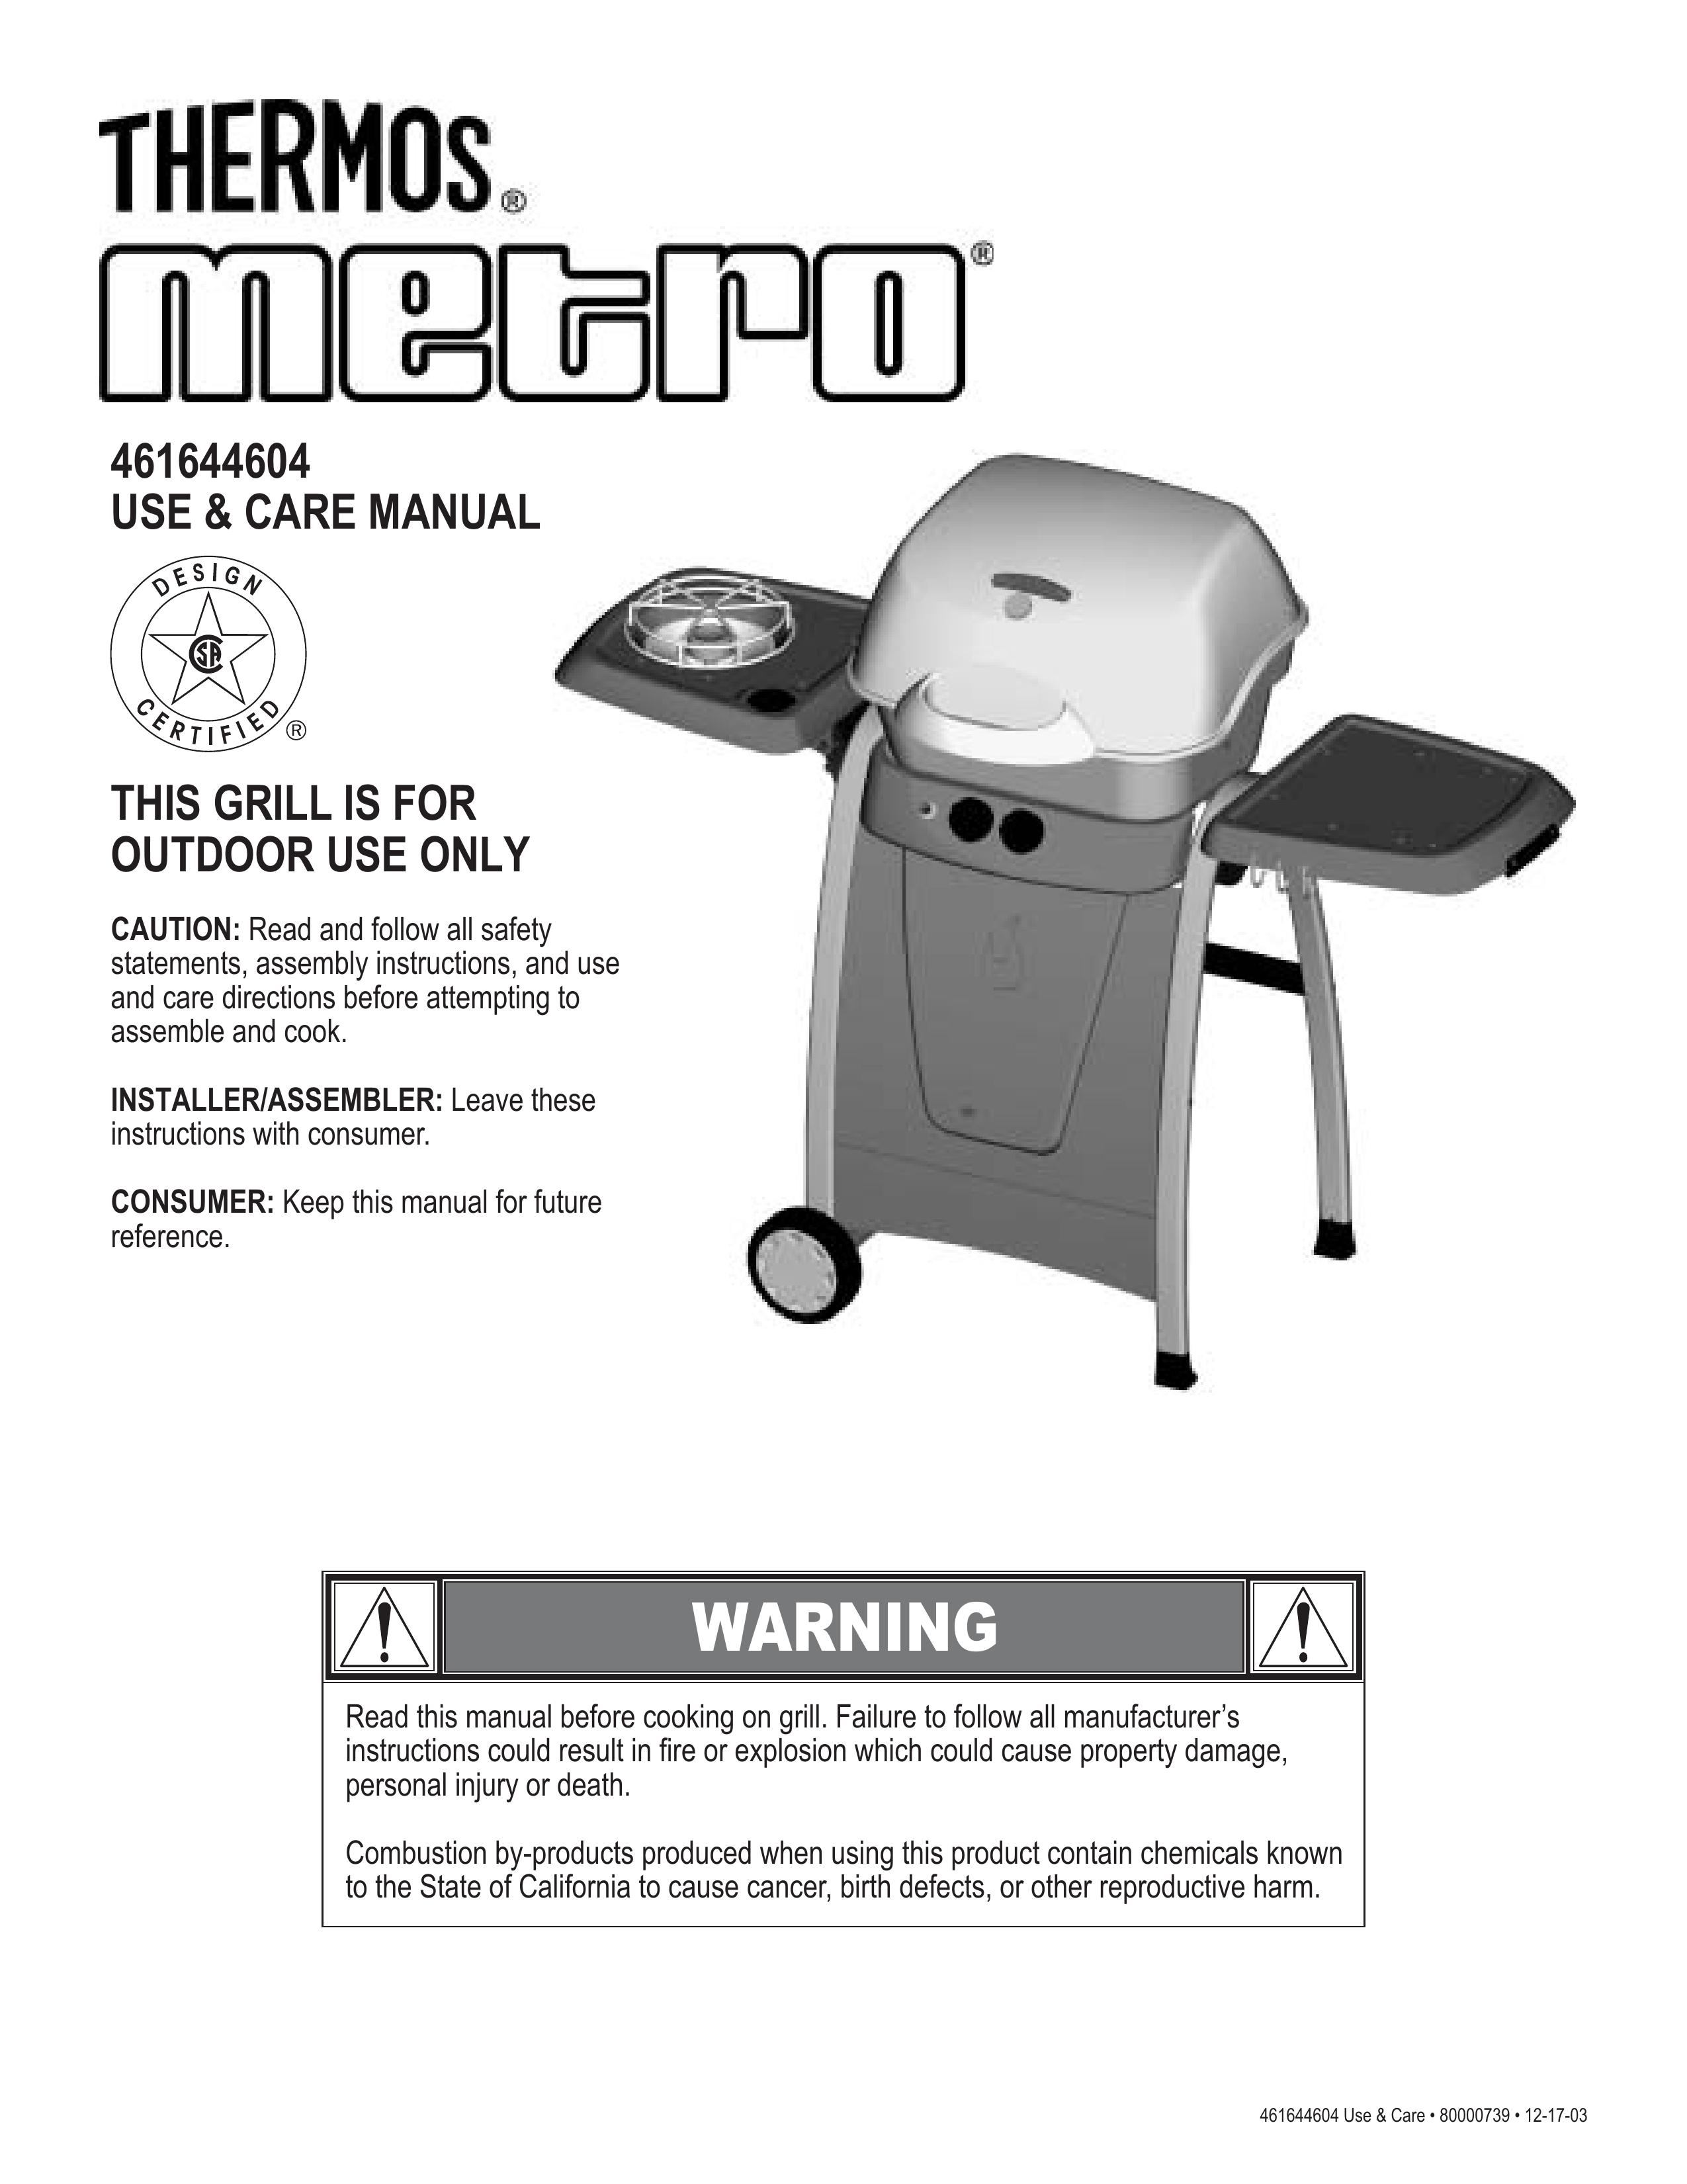 Thermos 461644604 Gas Grill User Manual